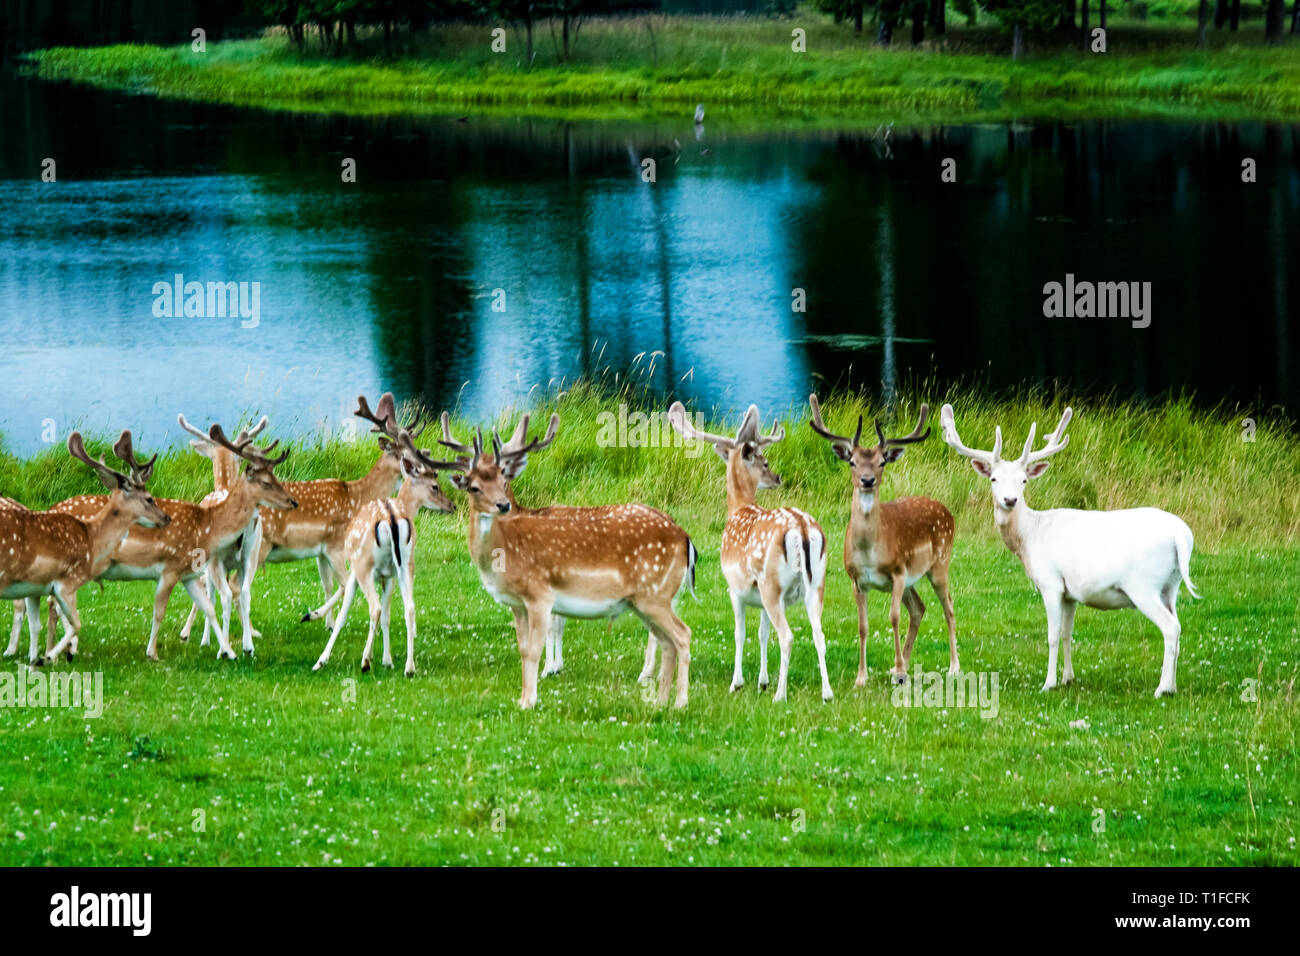 A big herd of deers standing together on a green field and watching. Stock Photo